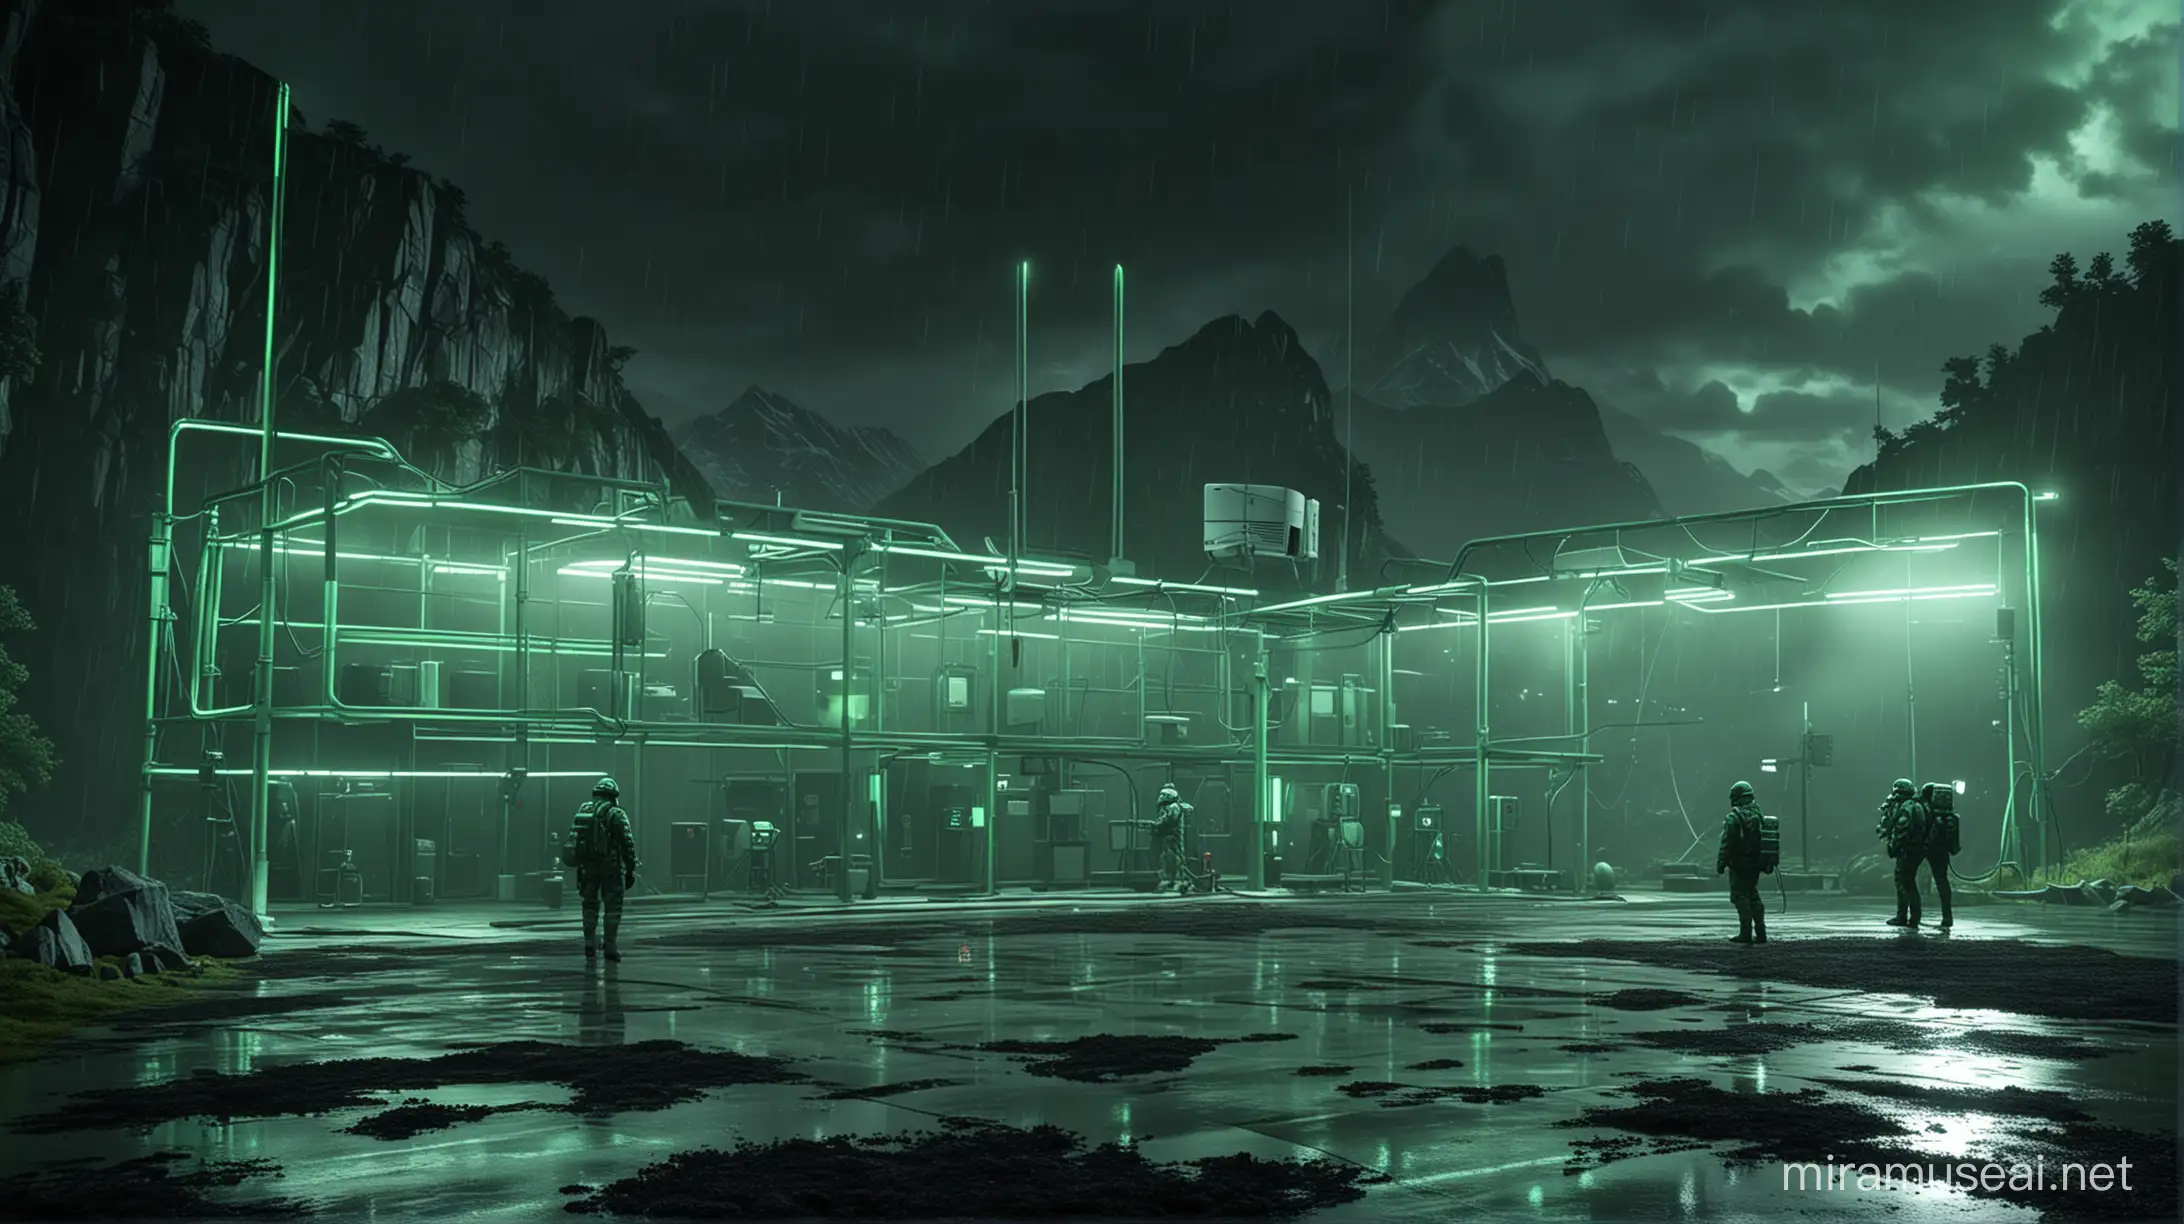 Realistic research centers with one worker around it, green neon and huge neon lights inside the part, its color shadow on the floor, Rainy weather, staff in dark green uniforms and helmets, Atmospheric and cinematic, The huge structures, A dark green smoke rose from the research centers environment and spread in the air, The image space is outside the realistic research center.
with huge satellite antennas,
A huge cubic green neon object,
in the Realistic mountains.
atmospheric and cinematic.
All overall dark green image theme.
Very big lights and lots of green neon lights.
The neon lights in the image should be very bright throughout the image.
The neon lights in the picture should be very bright in the dark
The neon lights in the picture should be very bright.
Very large and bright neon lamps in the structure.
Shades of green throughout the image.
3D.